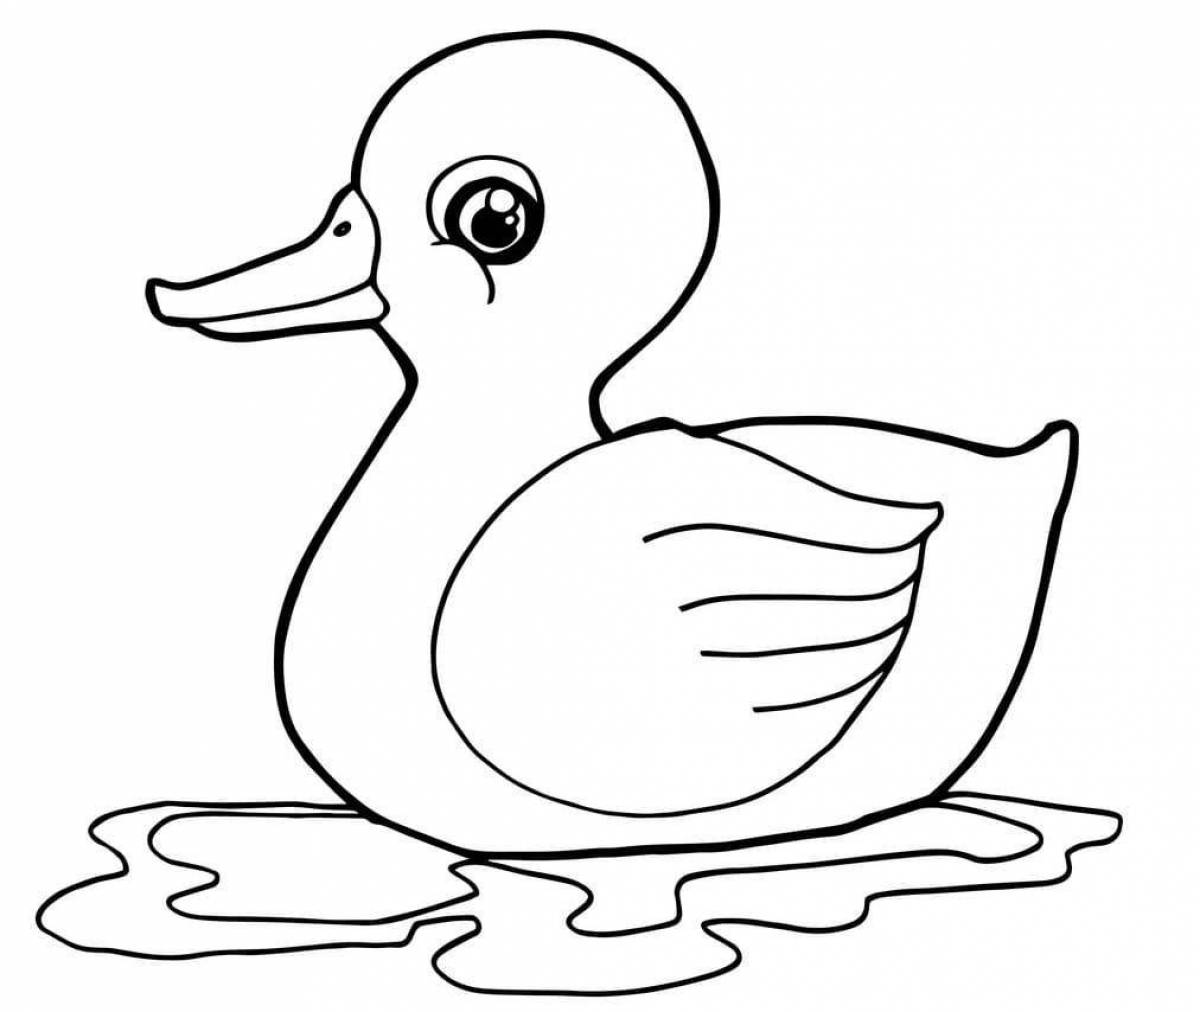 Blissful Smoky Duck coloring page